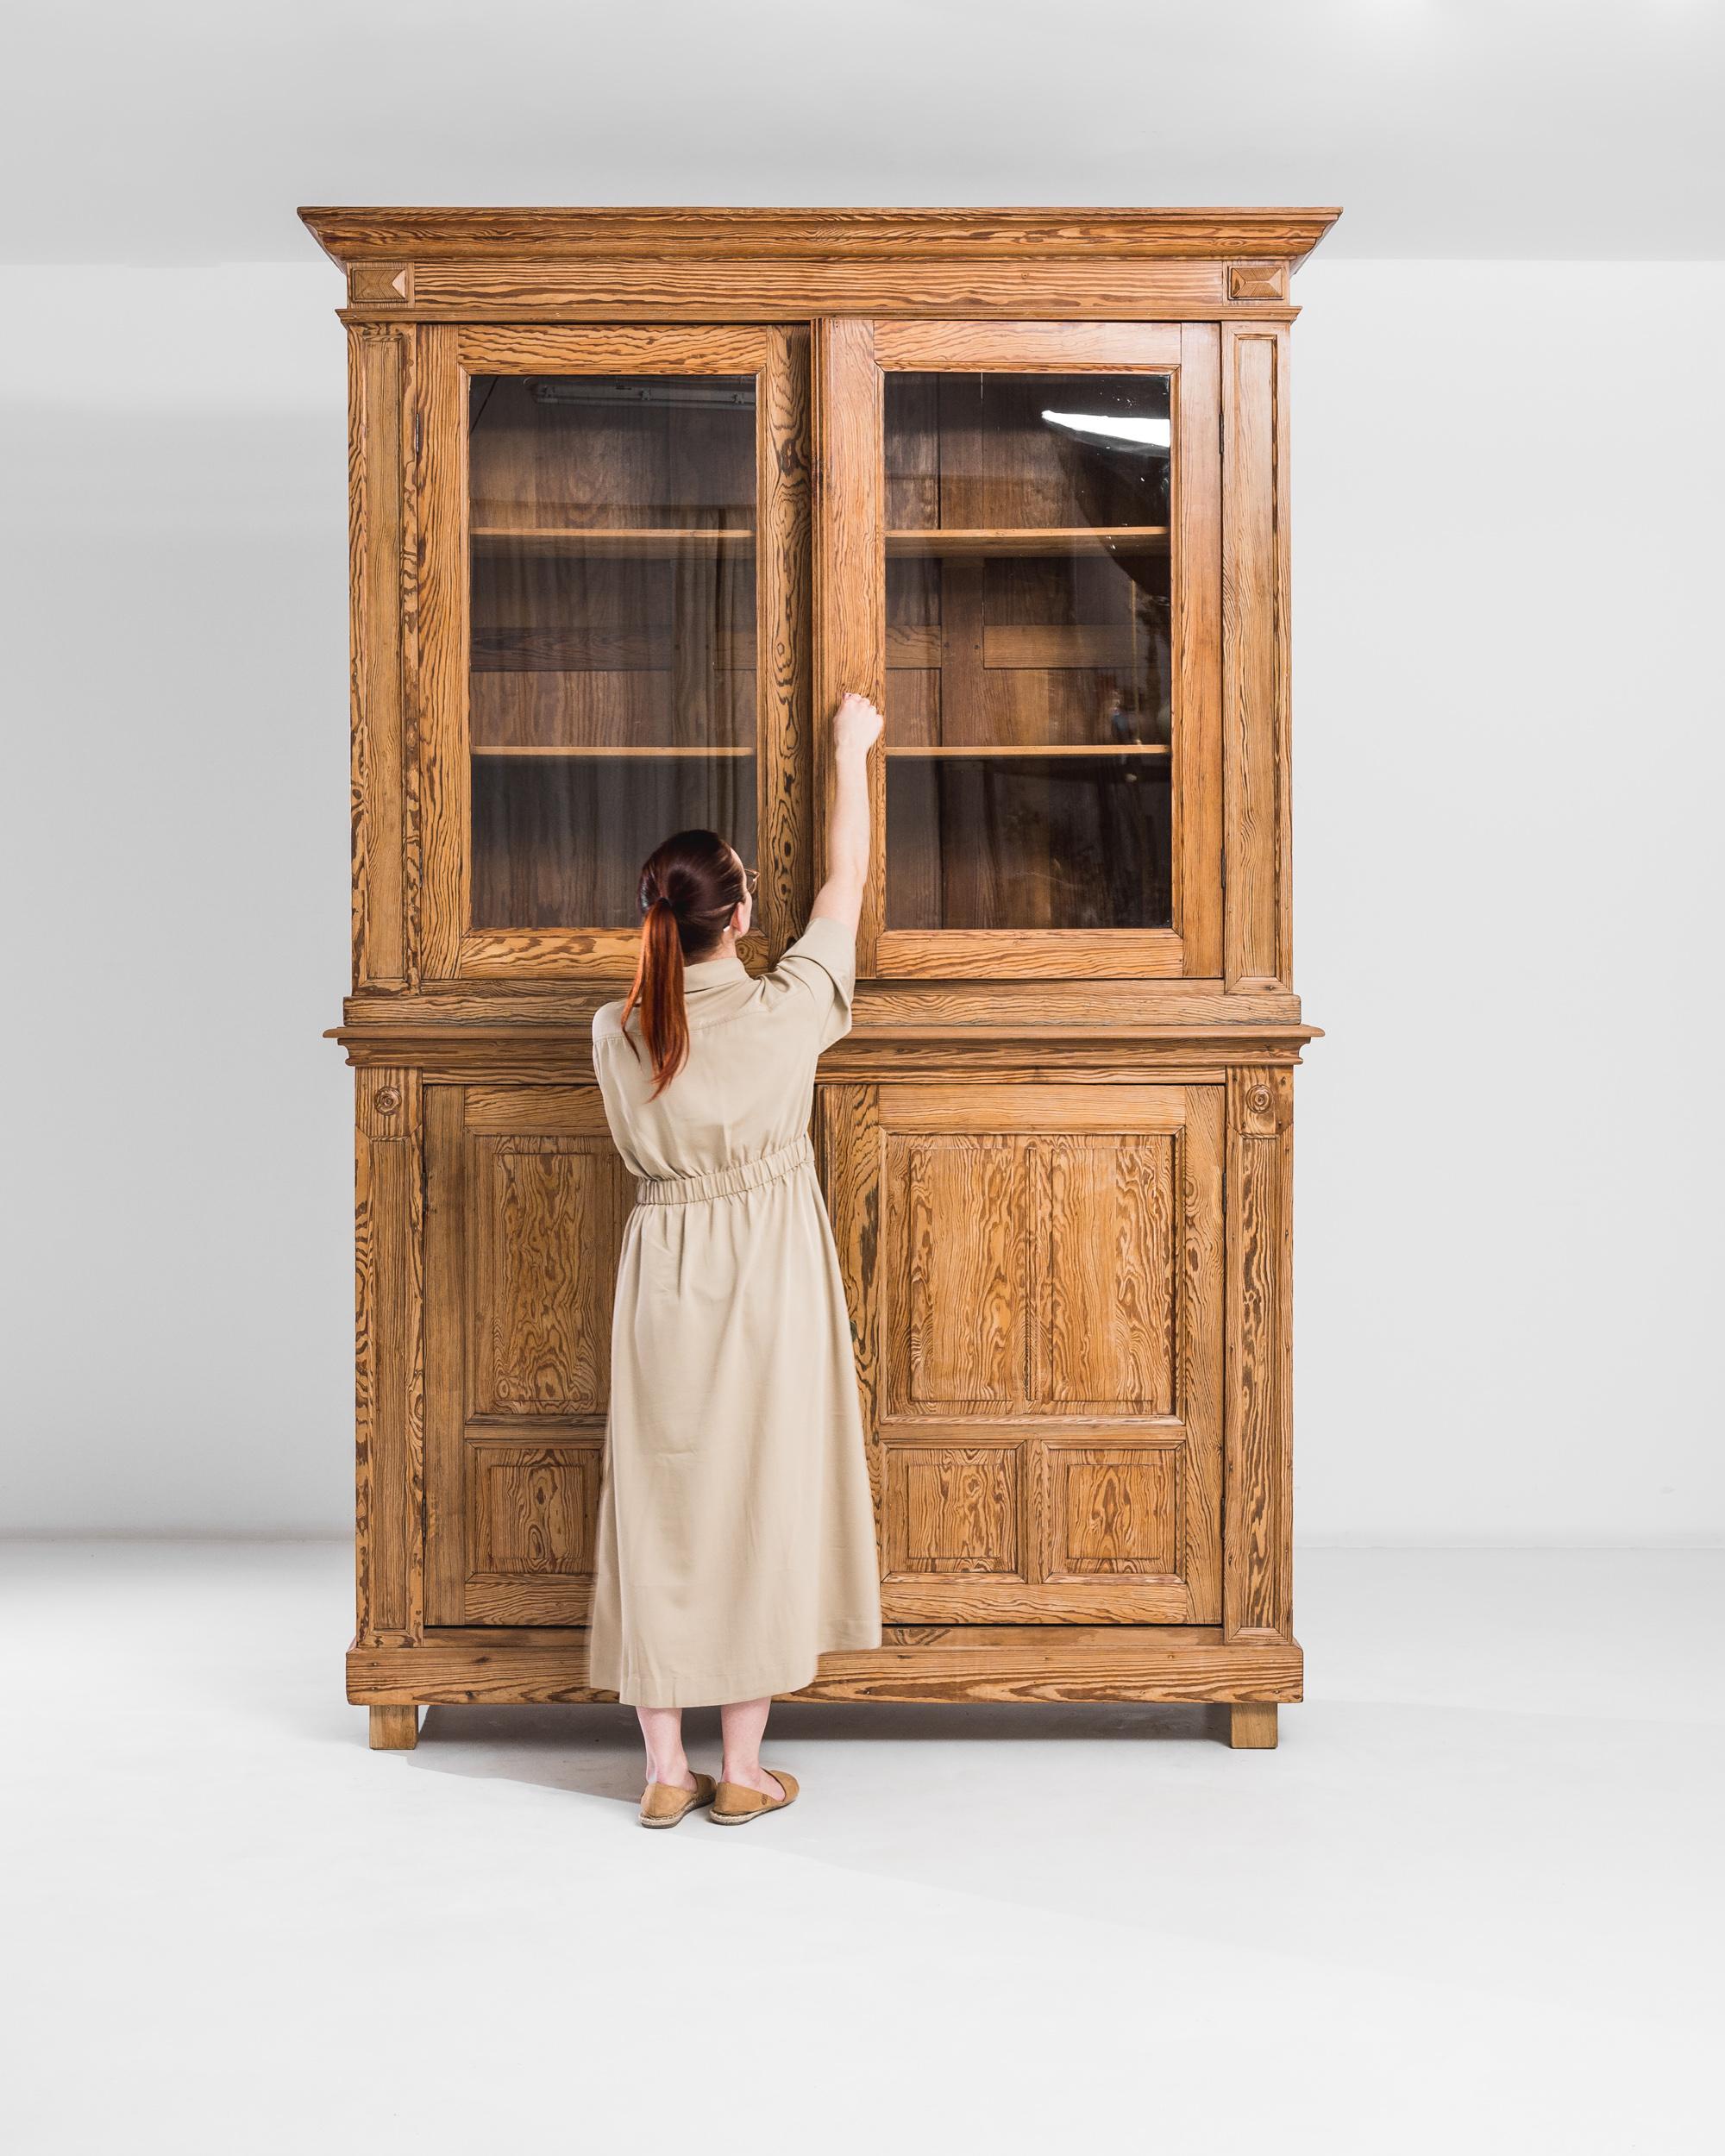 Embrace the charm of a 20th Century Belgian Wooden Cabinet, exuding warmth and sophistication through its inviting finish. This remarkable piece features two glass doors, offering a glimpse into well-appointed shelves on the upper tier. Below, two